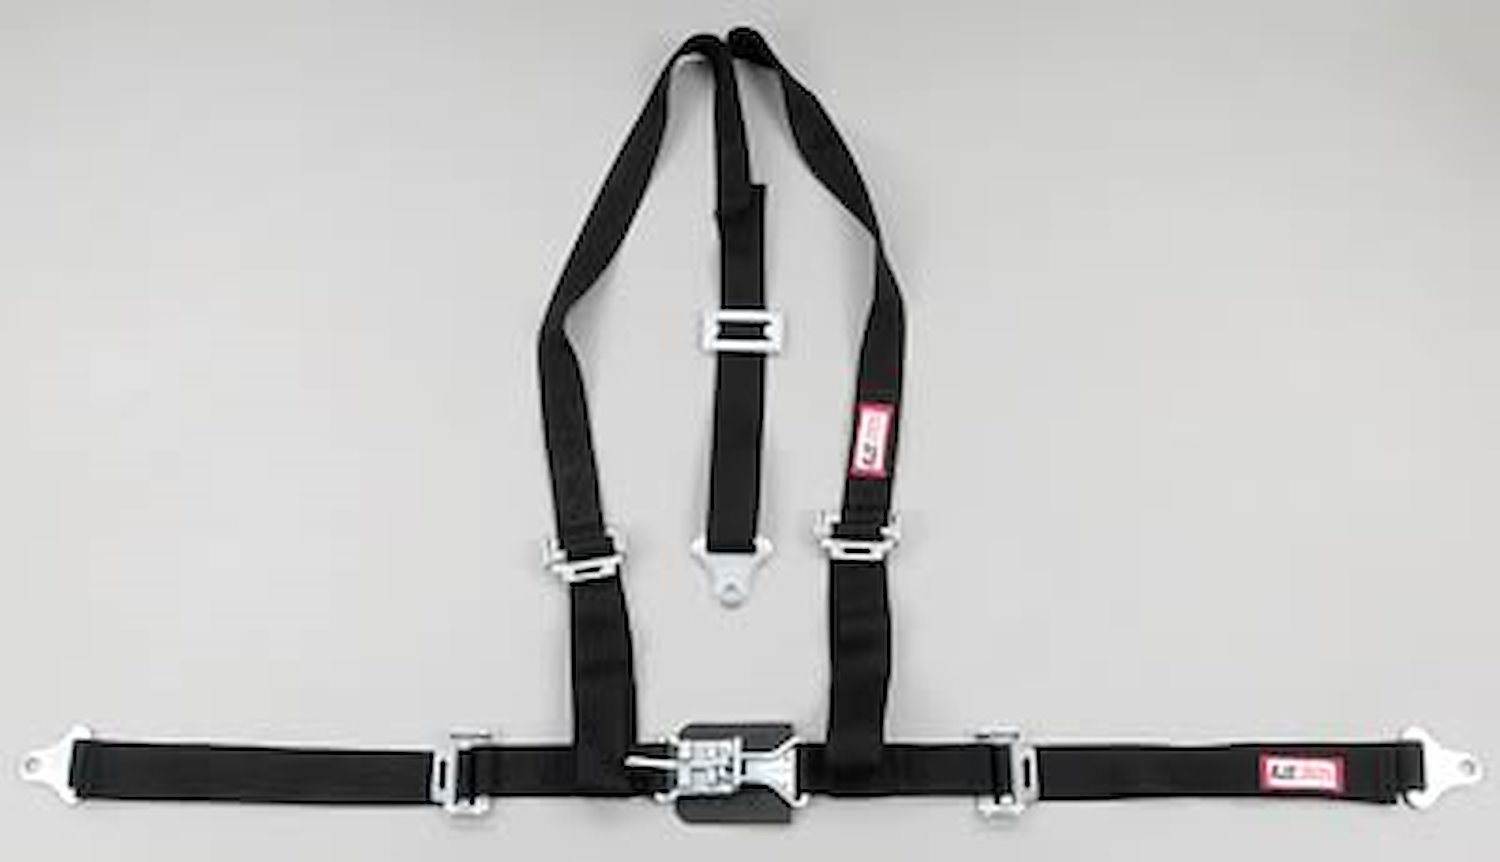 NON-SFI L&L HARNESS 3 PULL DOWN Lap Belt SEWN IN 2 Shoulder Harness V ROLL BAR Mount w/STERNUM STRAP ALL SNAP ENDS PURPLE